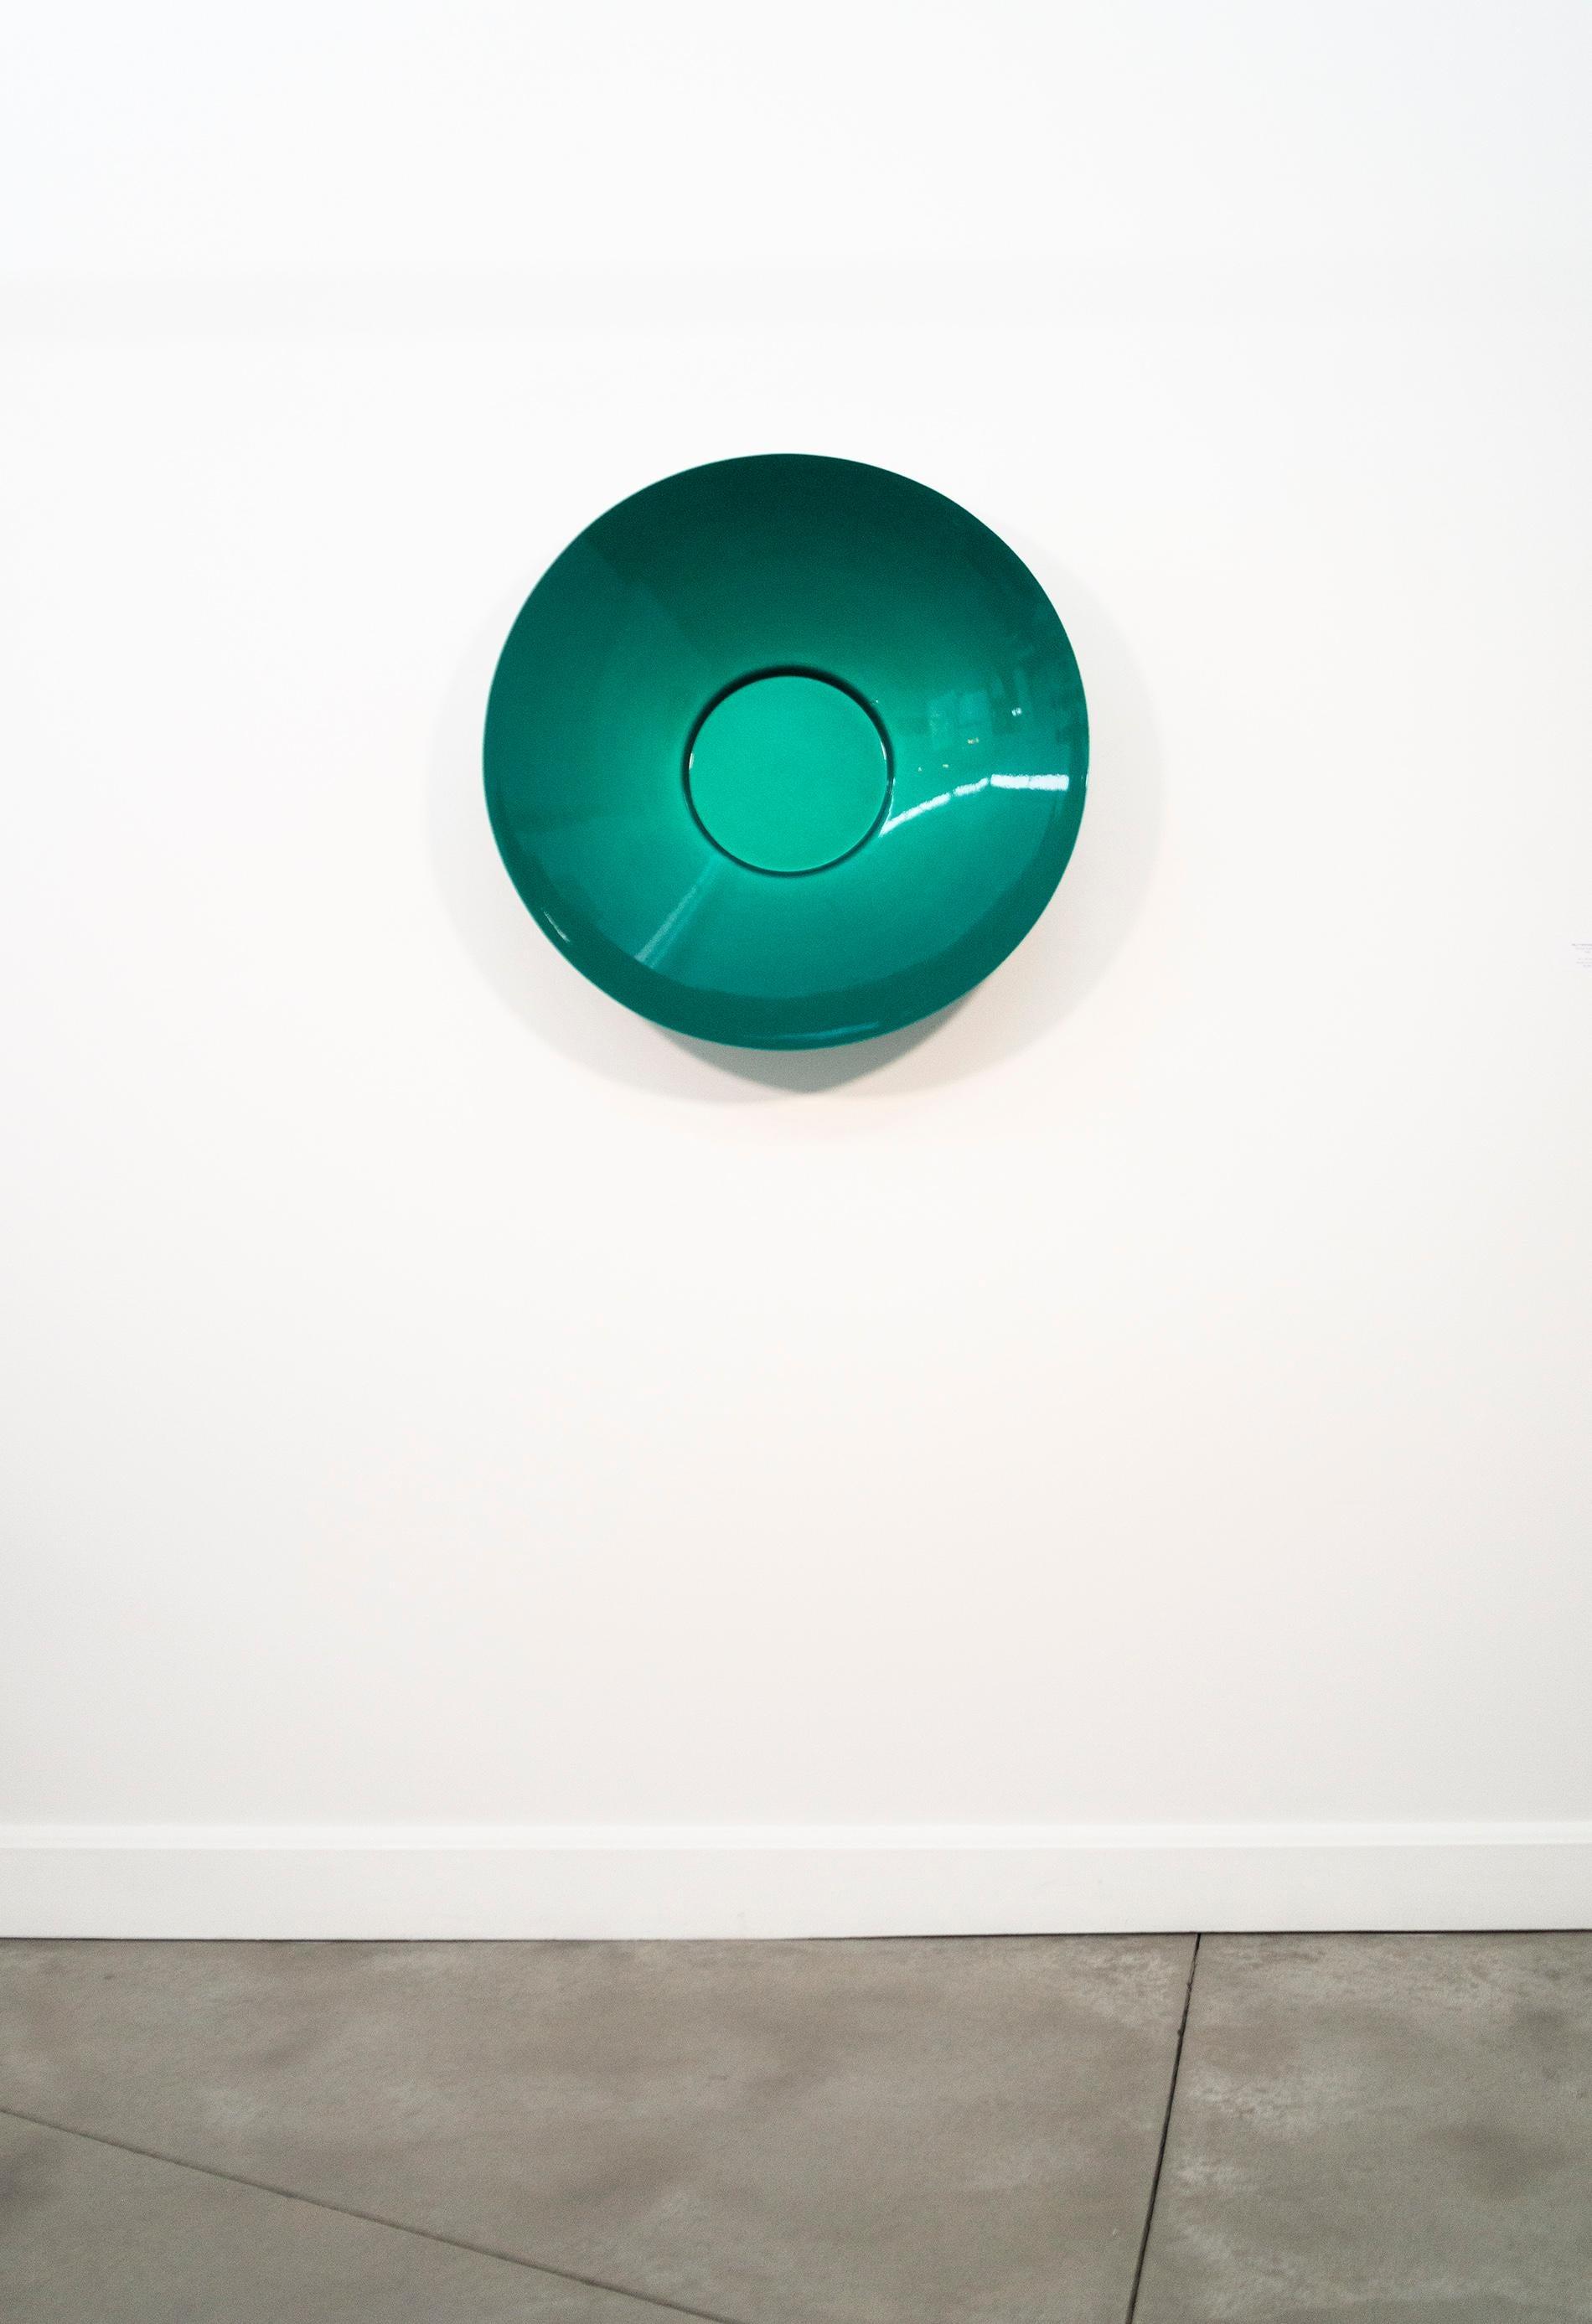 Singing Vessel Quetzal Green 32- circular, contemporary, steel wall sculpture - Abstract Geometric Sculpture by Marlene Hilton Moore